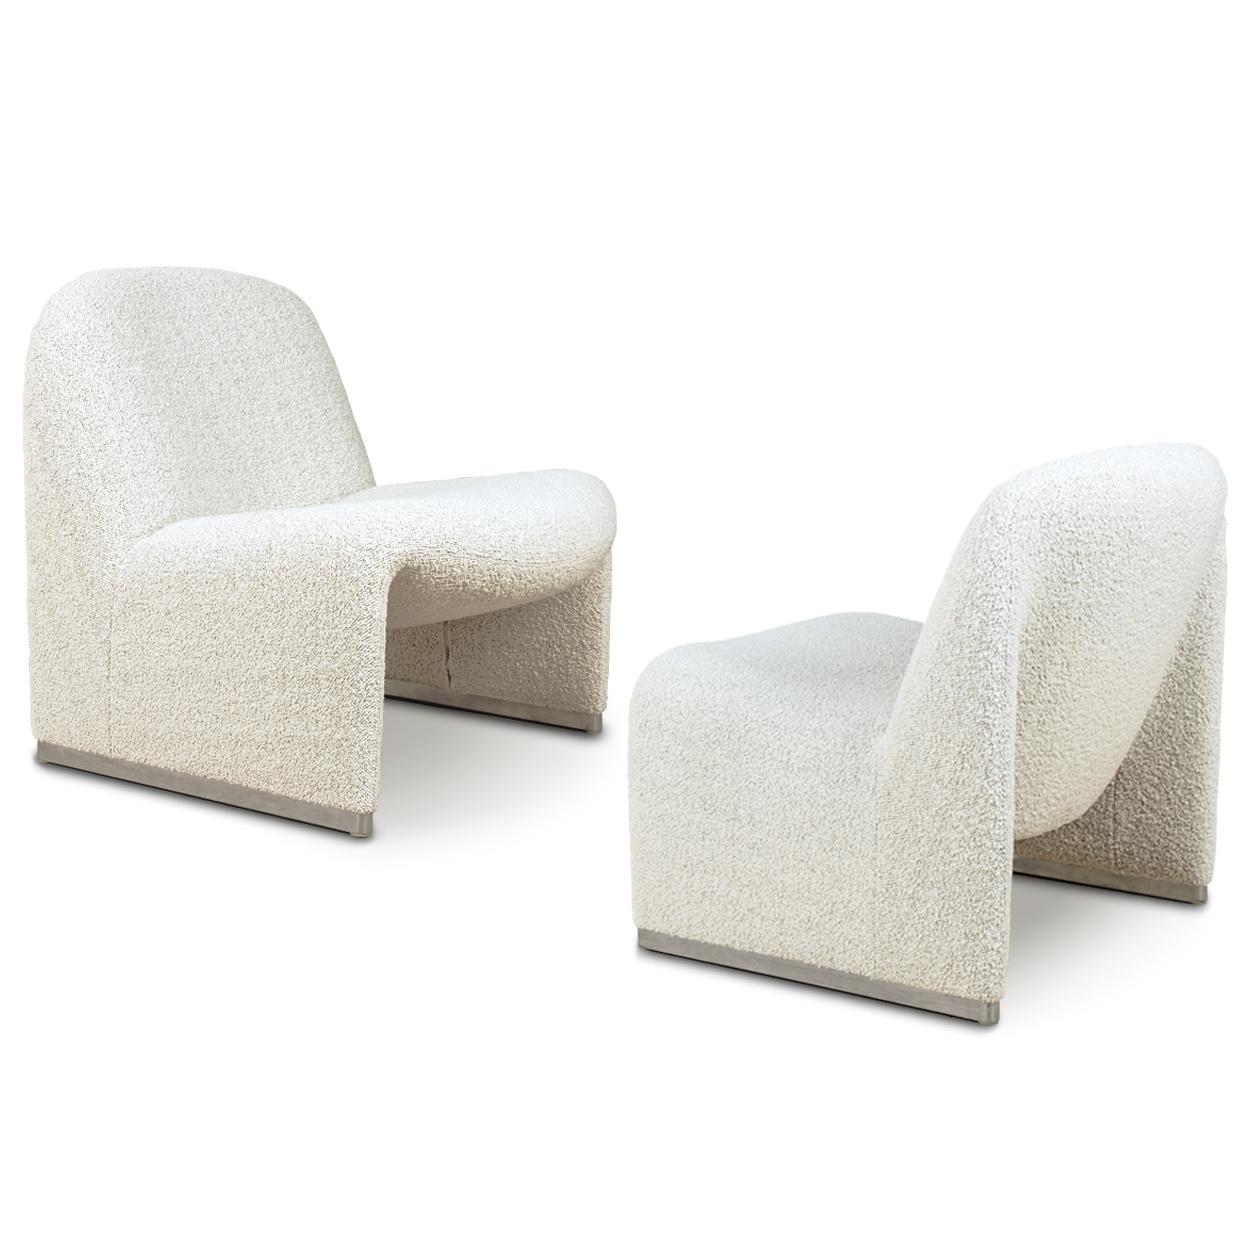 Space Age Alky Piretti Chairs, New Upholstered with Fabric Dedar, Italy